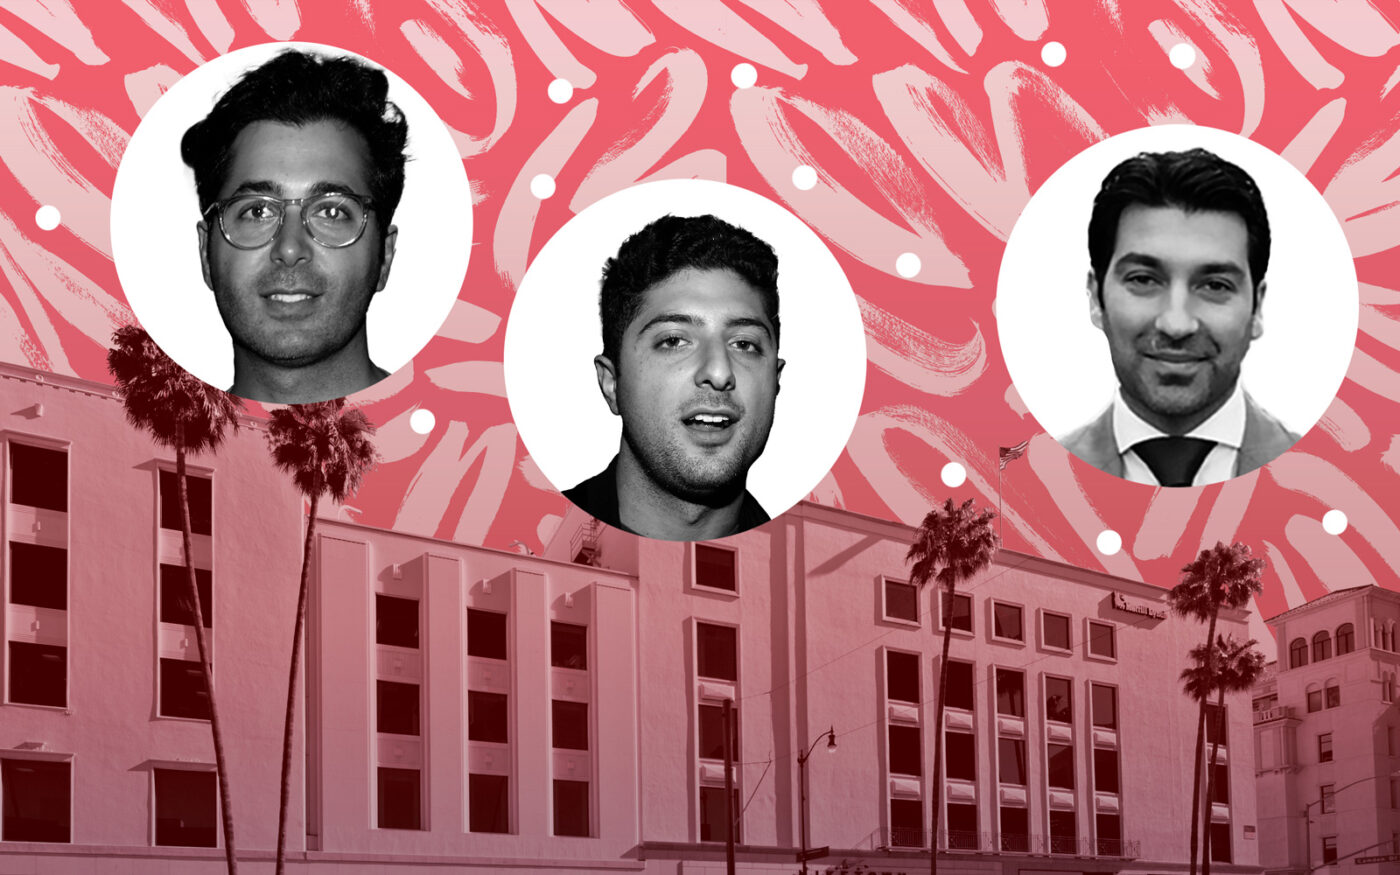 Tinder Co-Founder and Family Buy Beverly Hills Buildings